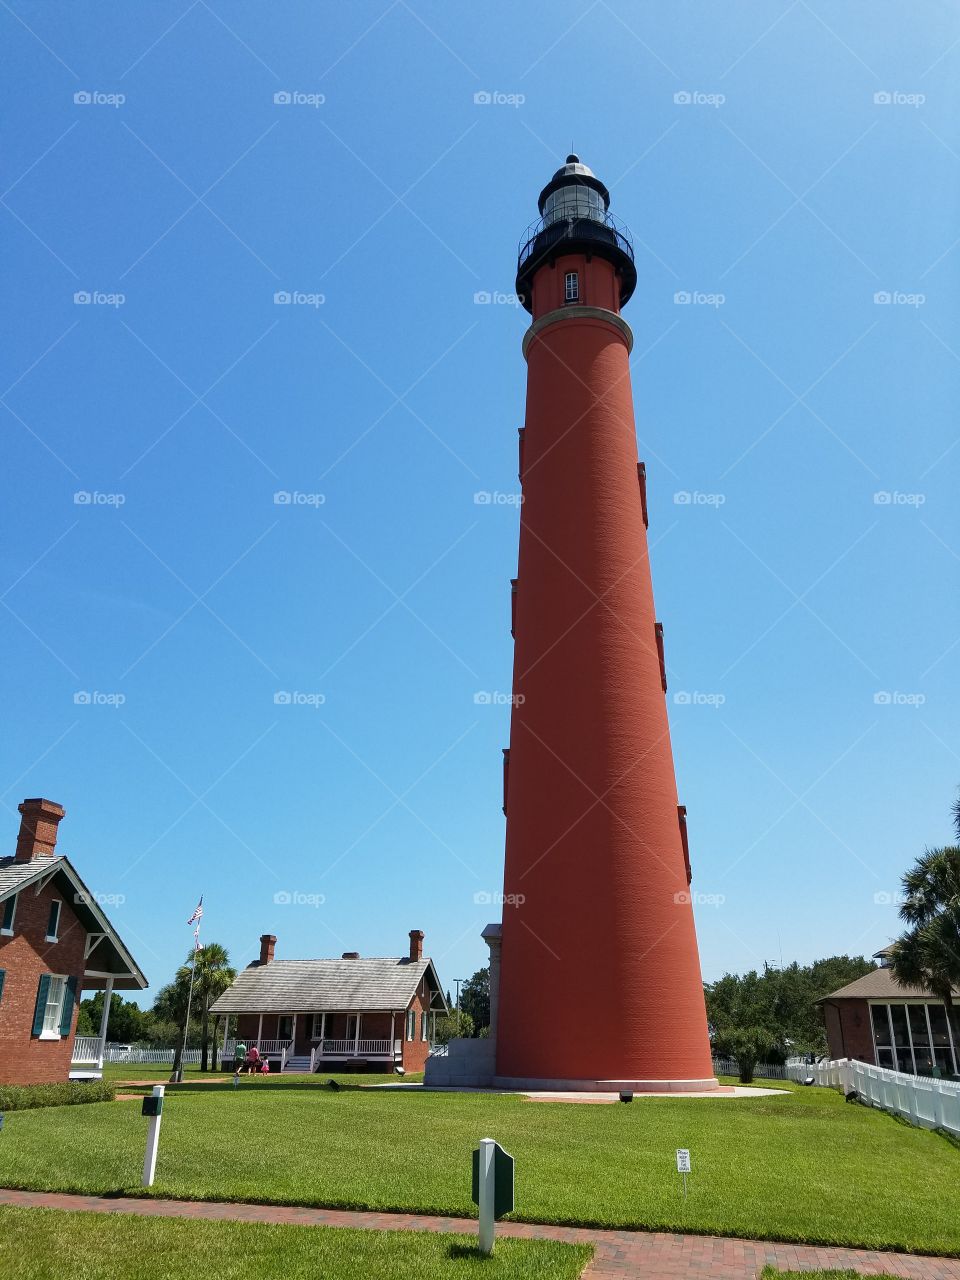 No Person, Lighthouse, Architecture, Outdoors, Daylight